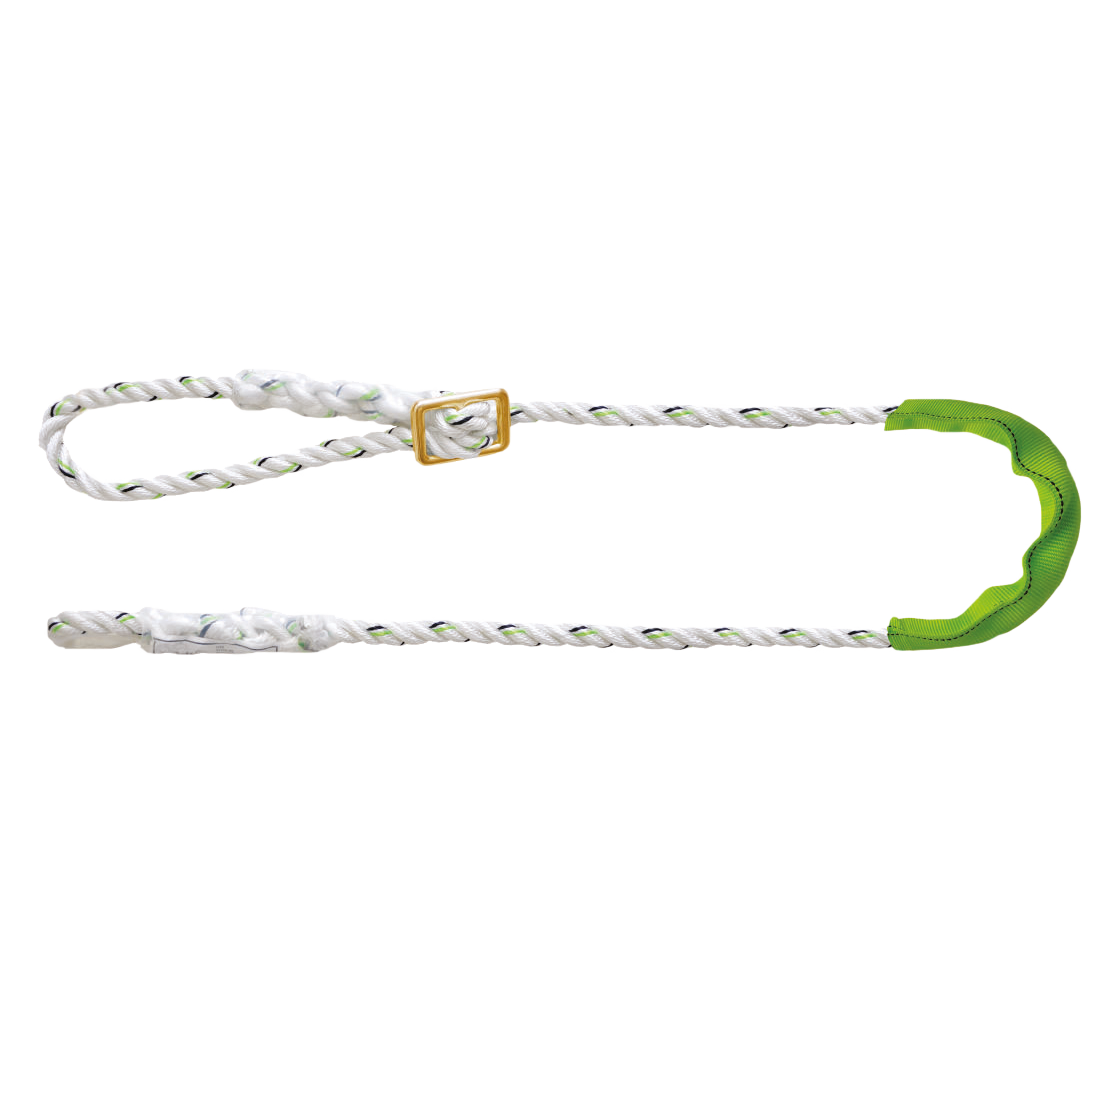 ADJUSTABLE ROPE FROM 1 M TO 2 M